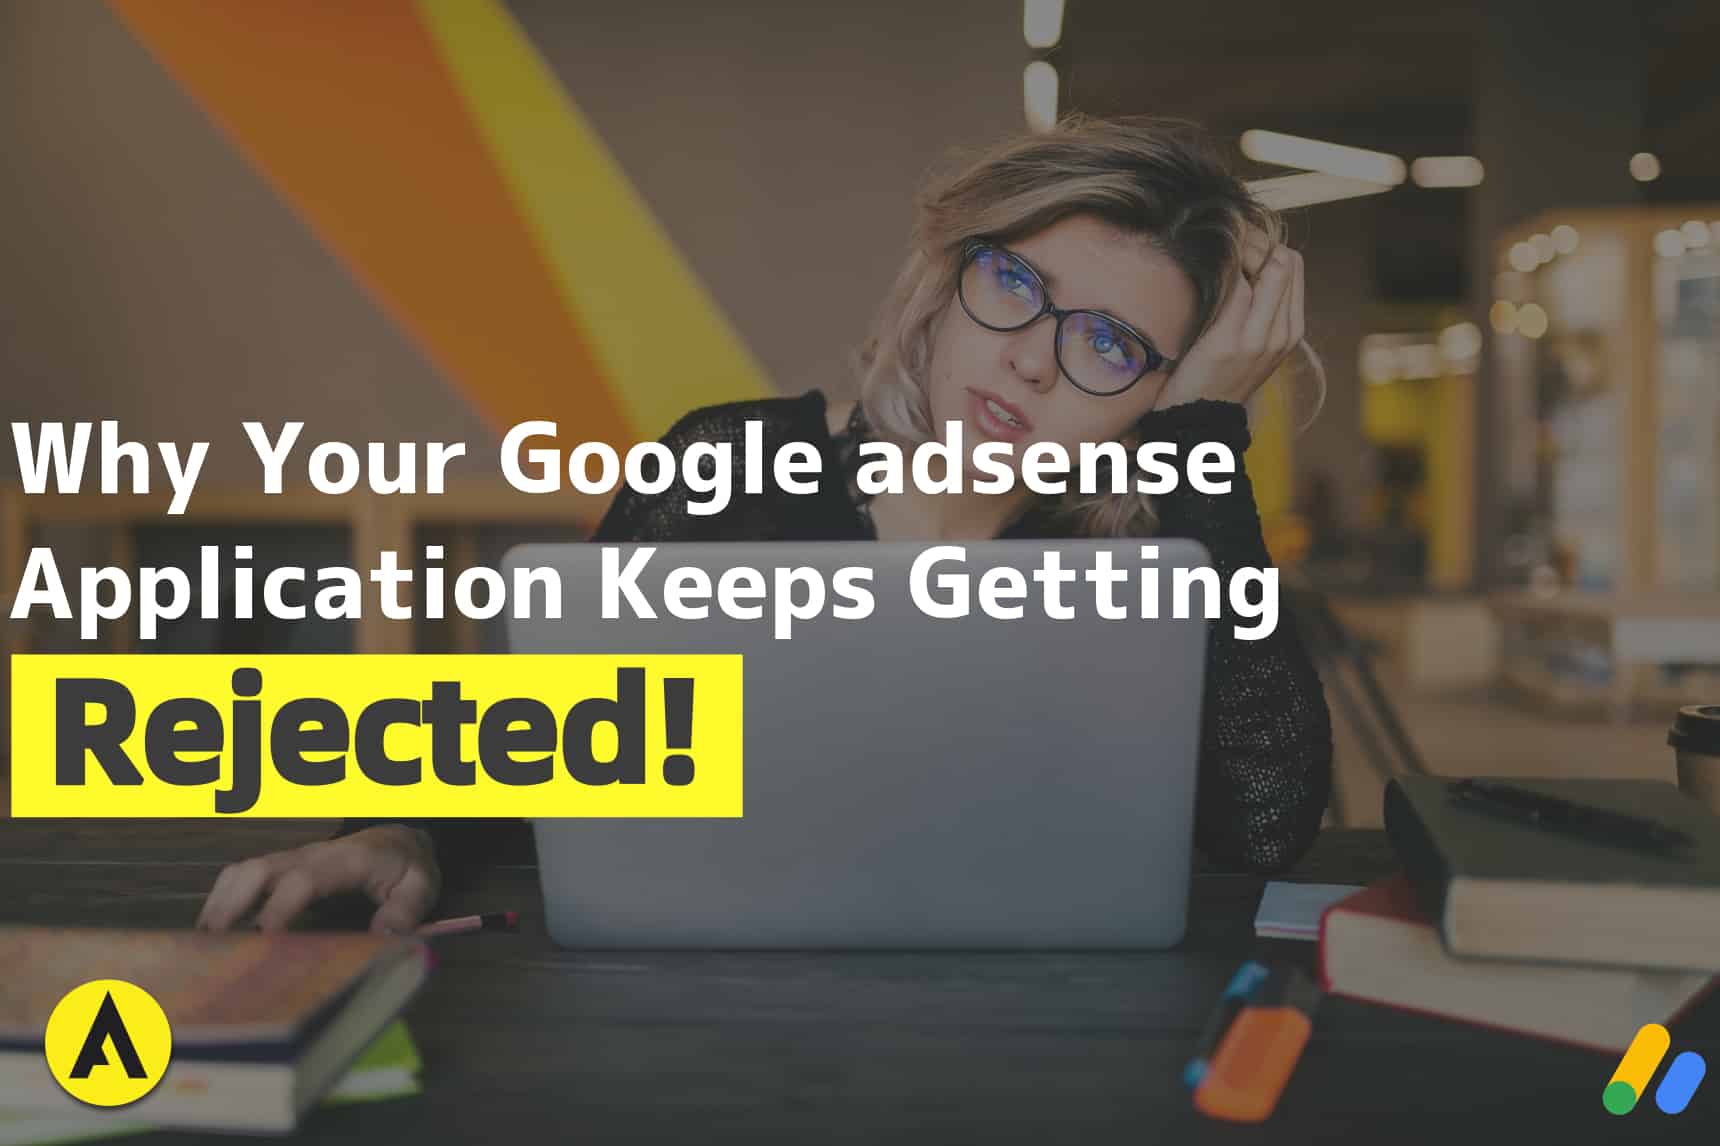 Google Adsense Application Rejected: How to Get Approved! 4